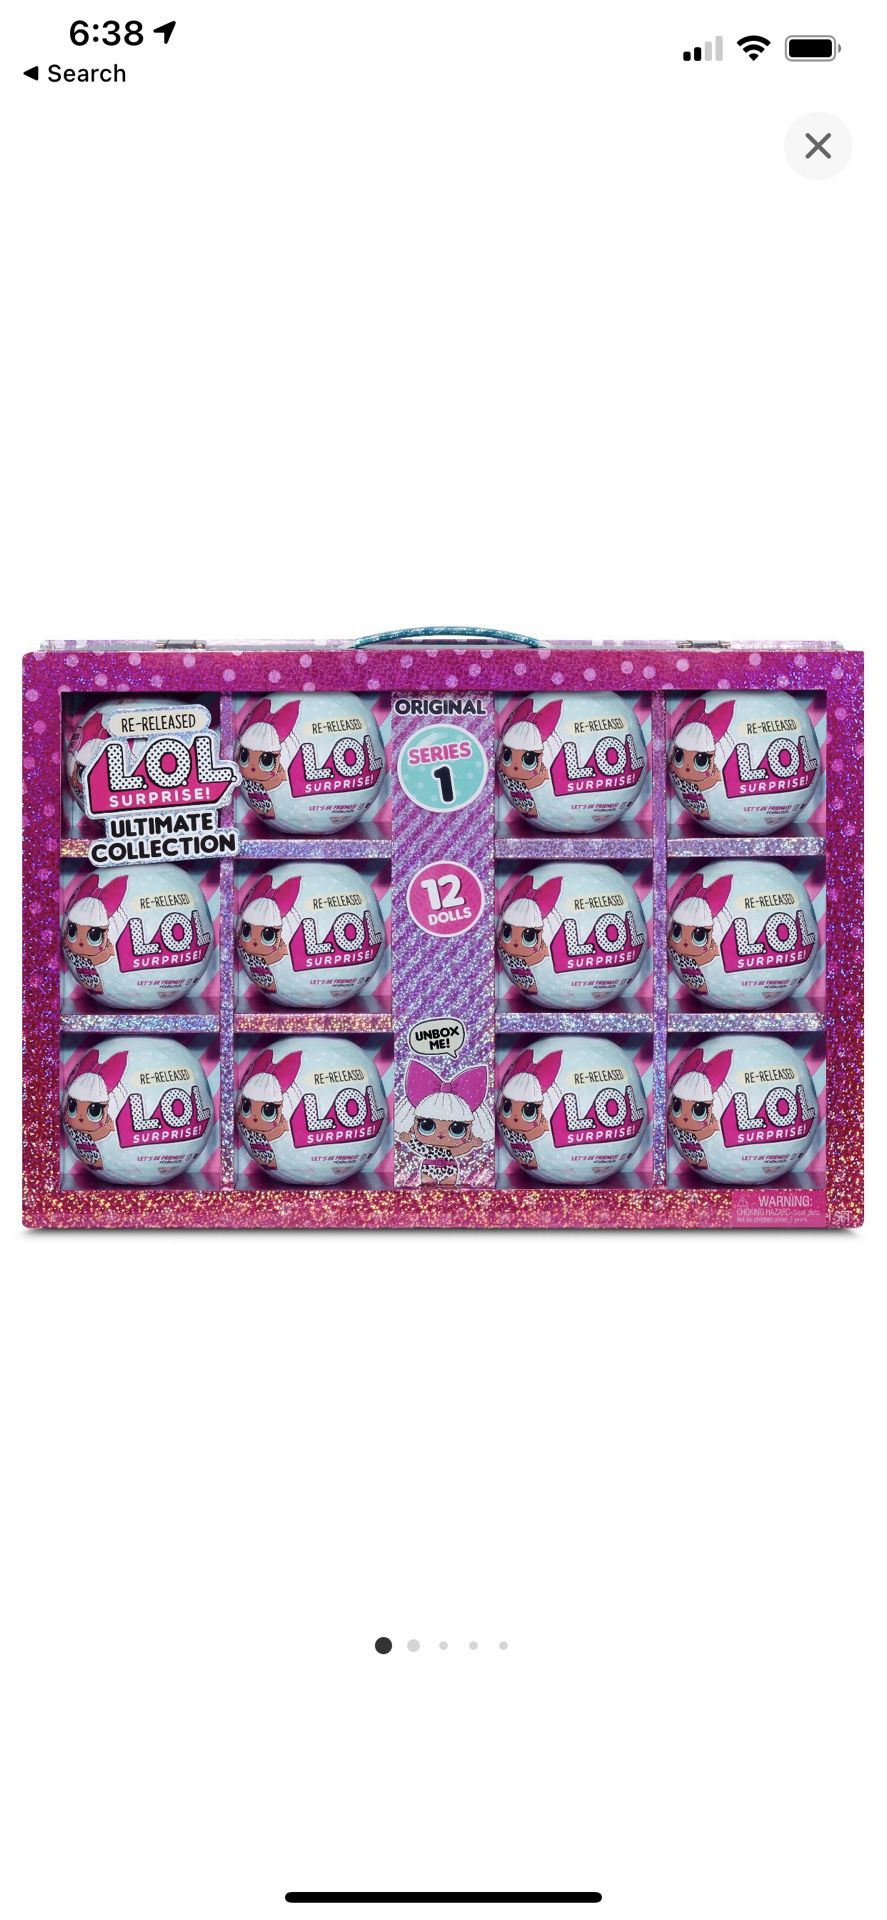 L.O.L Surprise! S1 Ultimate Collection Diva 12 Re-Released dolls!!!